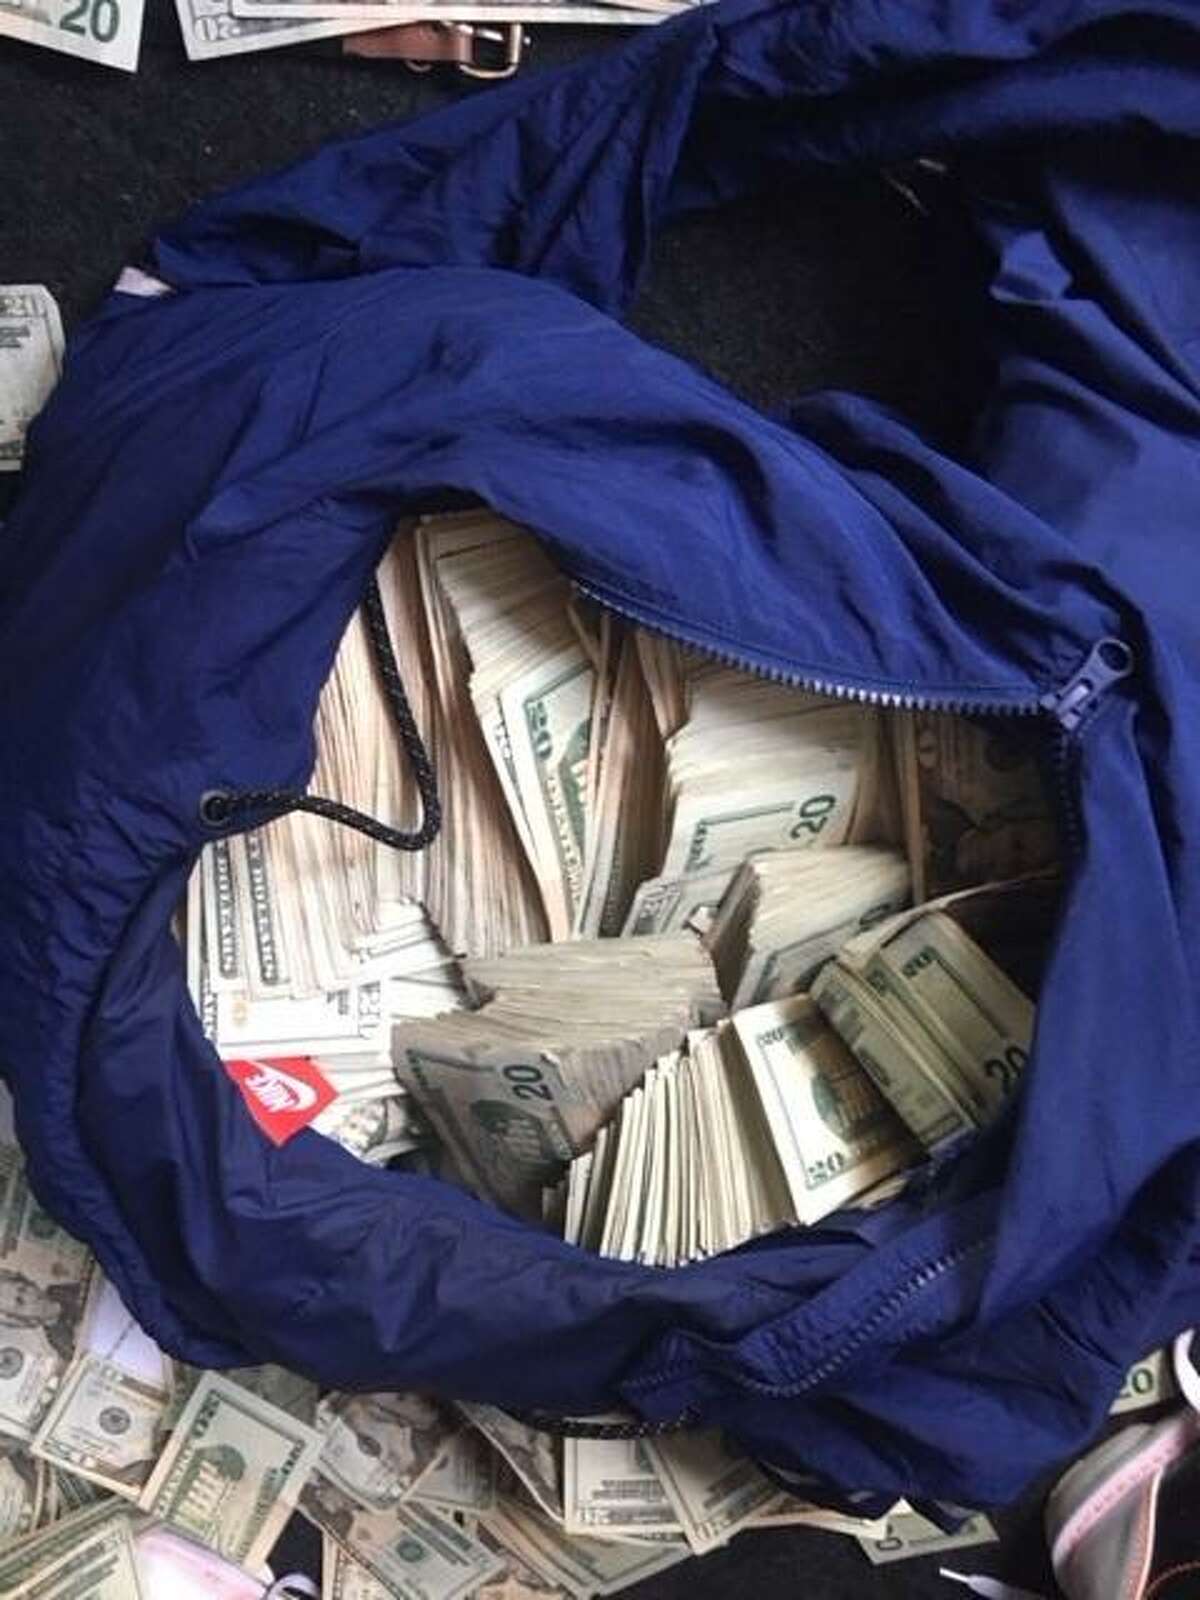 Border Patrol agents recovered $88,220 from a vehicle believed to be connected to the robbery of an ATM technician in Laredo on Feb. 6, 2018.